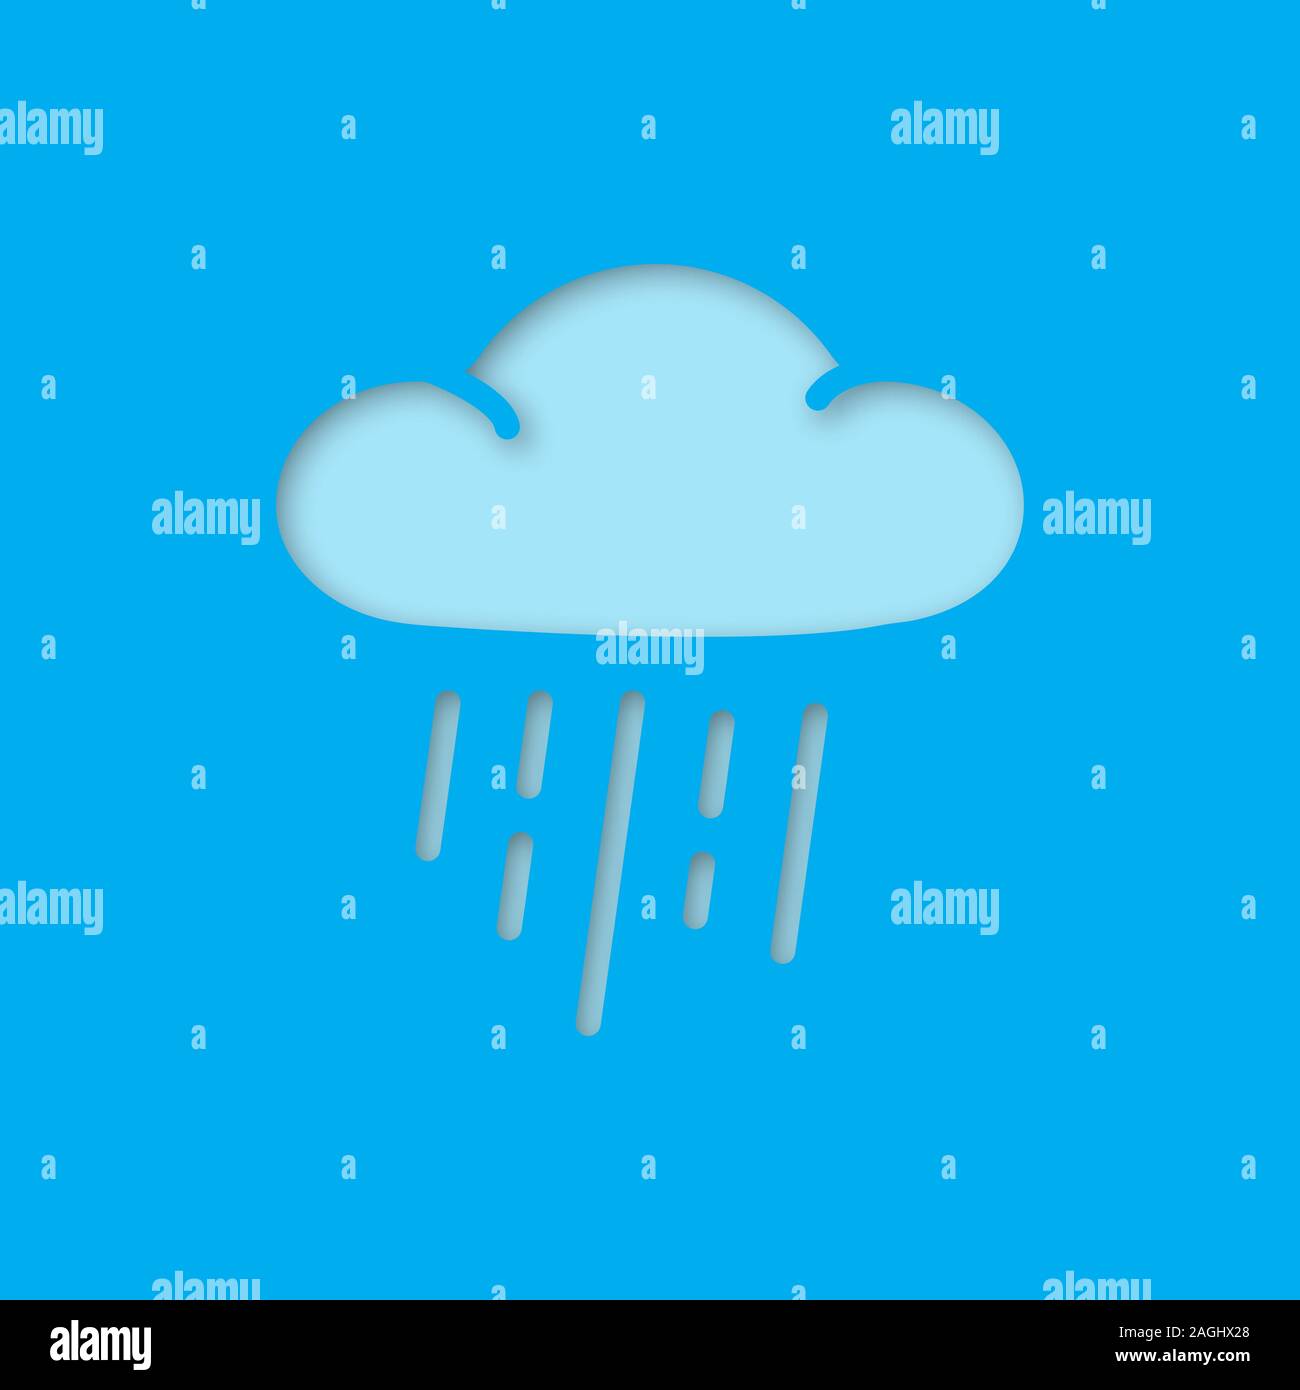 Rainy cloud paper cut out icon. Rain. Vector silhouette isolated ...